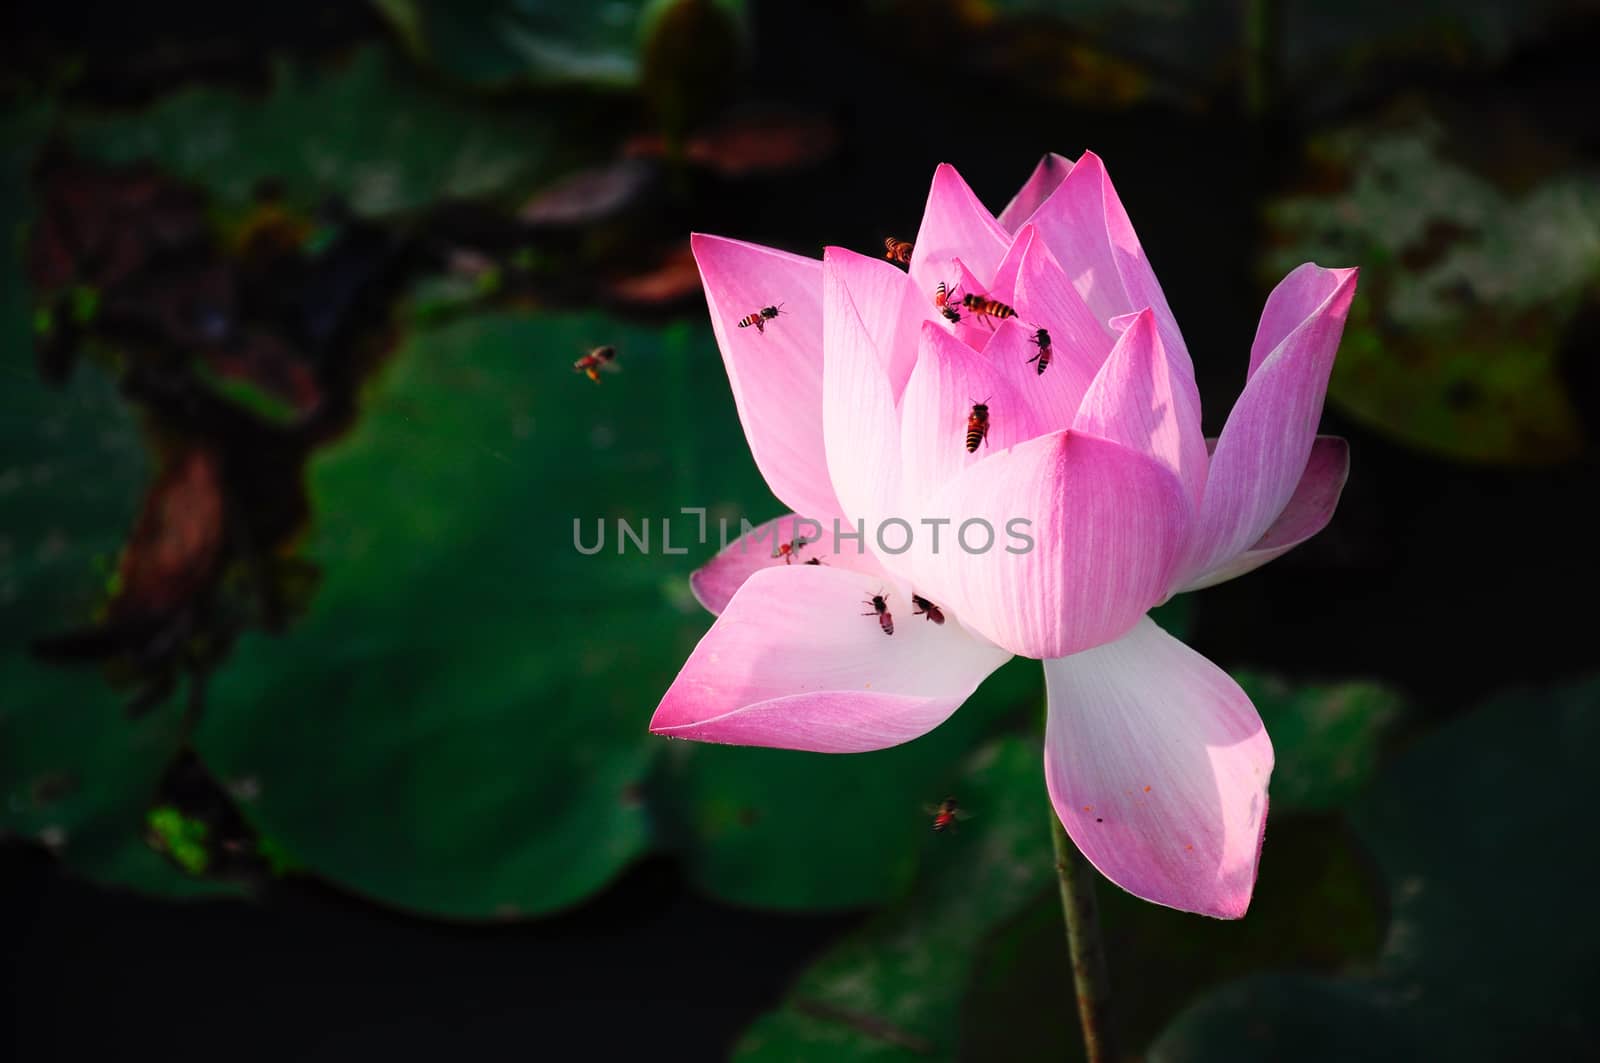 Bees get nectar from lotus flower by Komngui